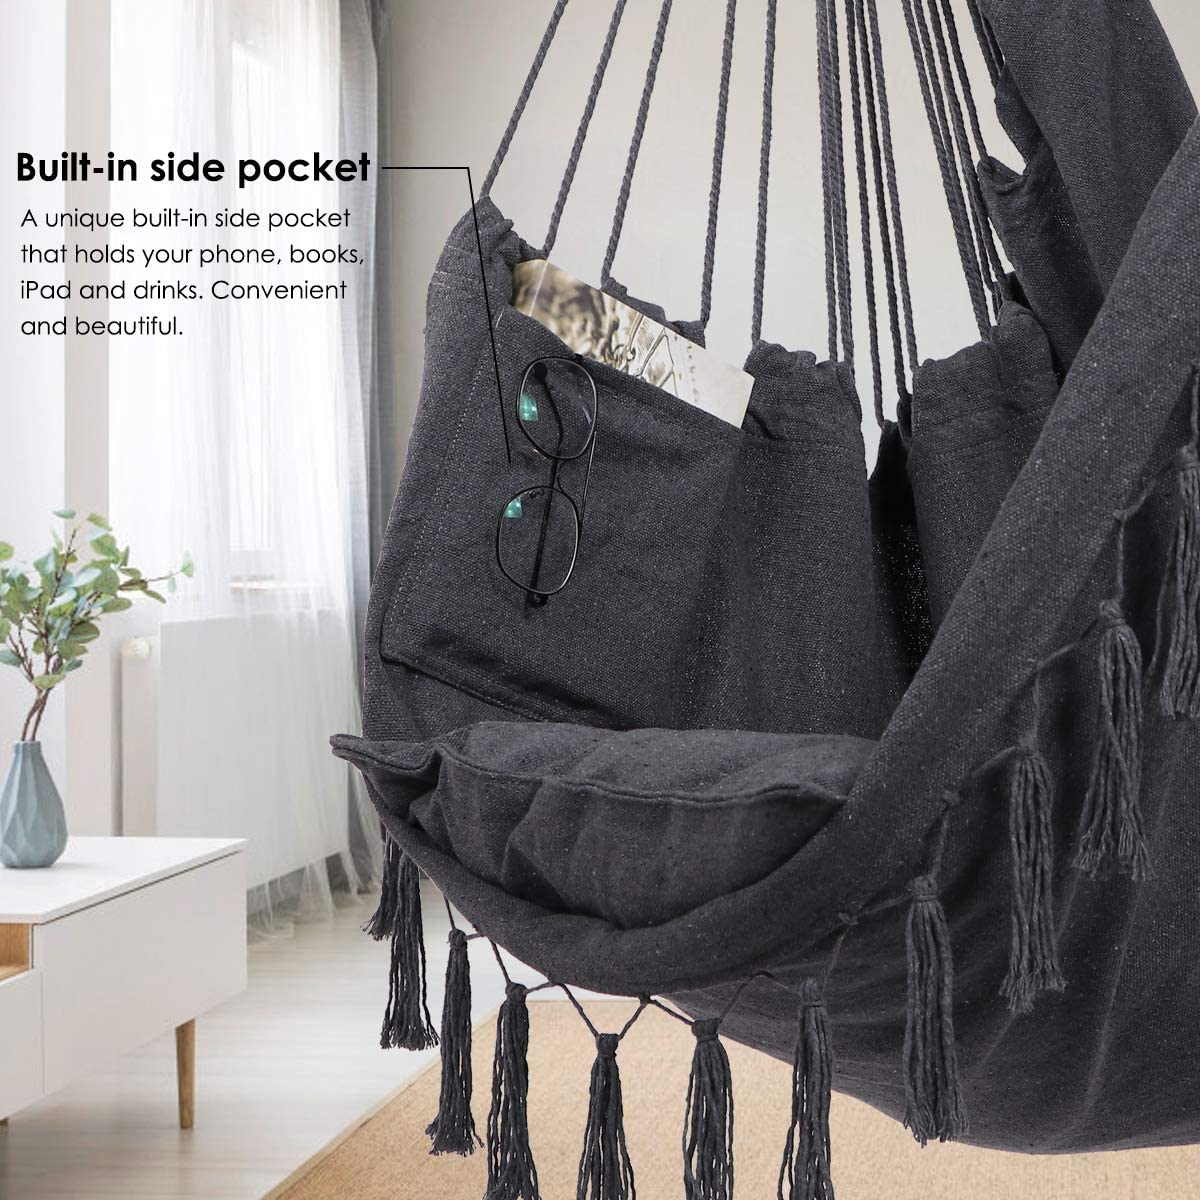 Max-330Lbs150KG-Hammock-Chair-Hanging-Rope-Swing-with-2-Cushions-Included-Large-Tassel-Hanging-Chair-1726402-5